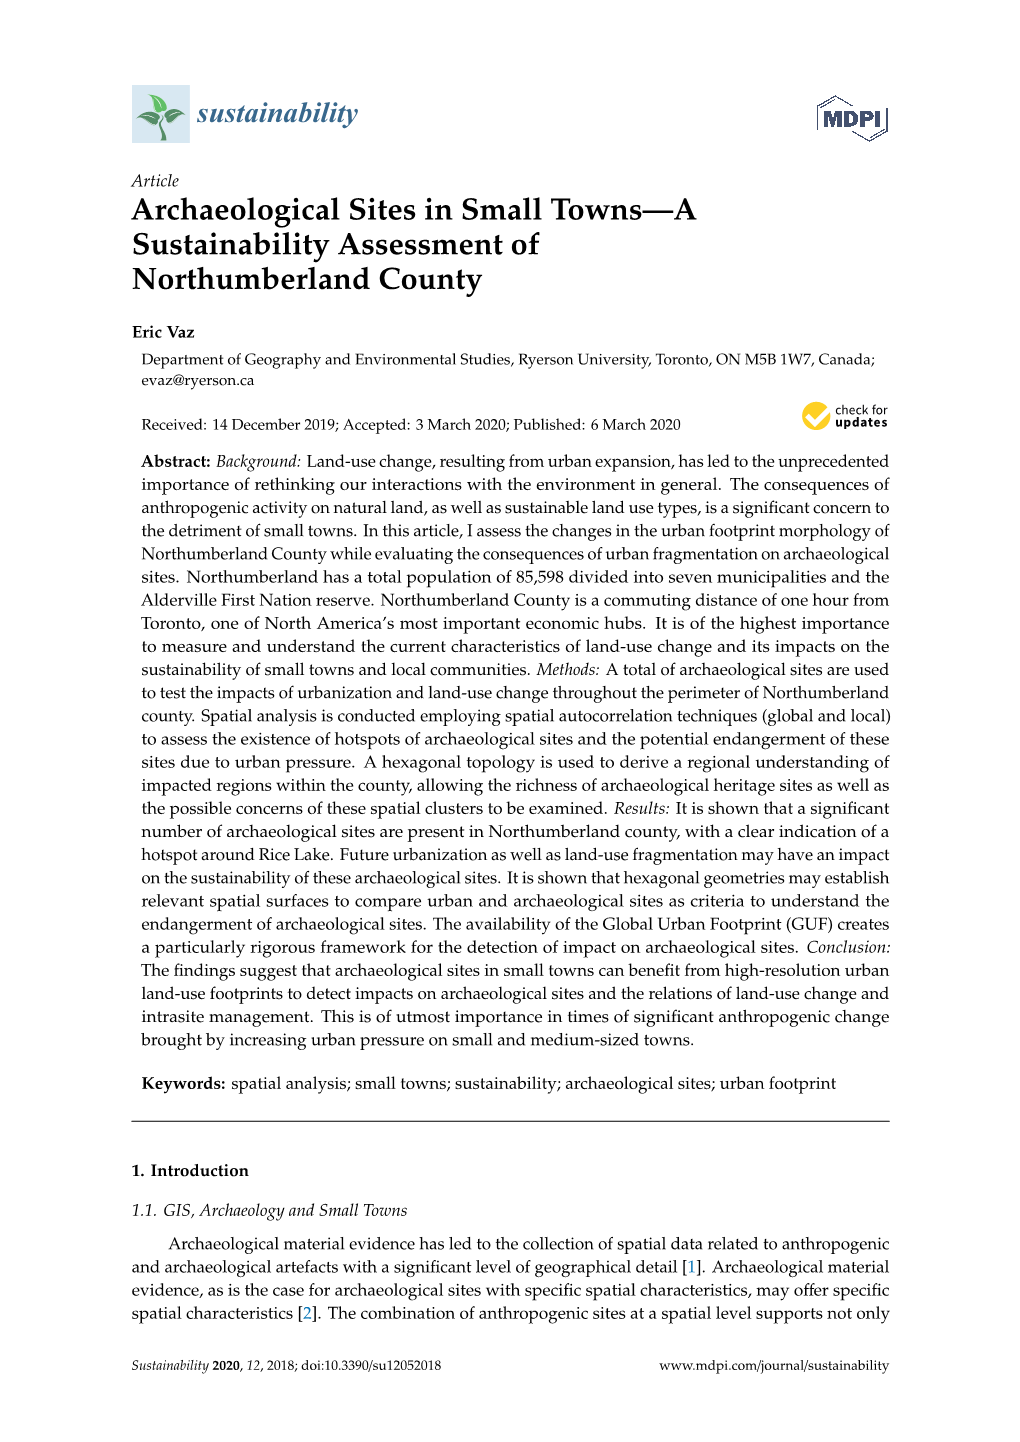 Archaeological Sites in Small Towns—A Sustainability Assessment of Northumberland County